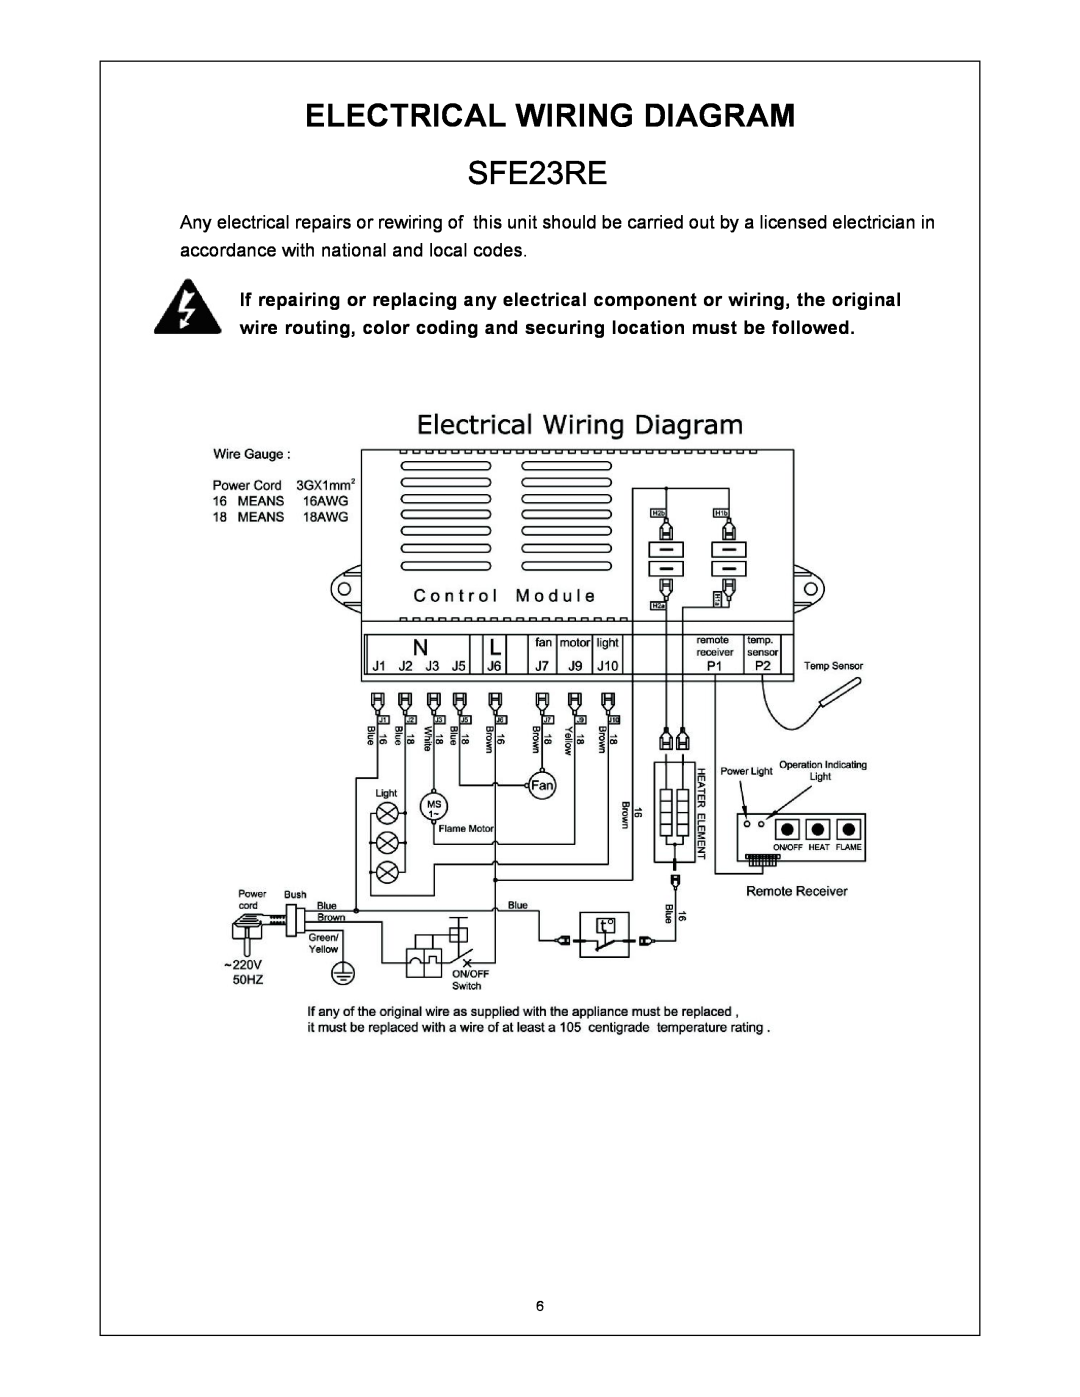 Procom SFE33RE, SFE23RE installation instructions Electrical Wiring Diagram 